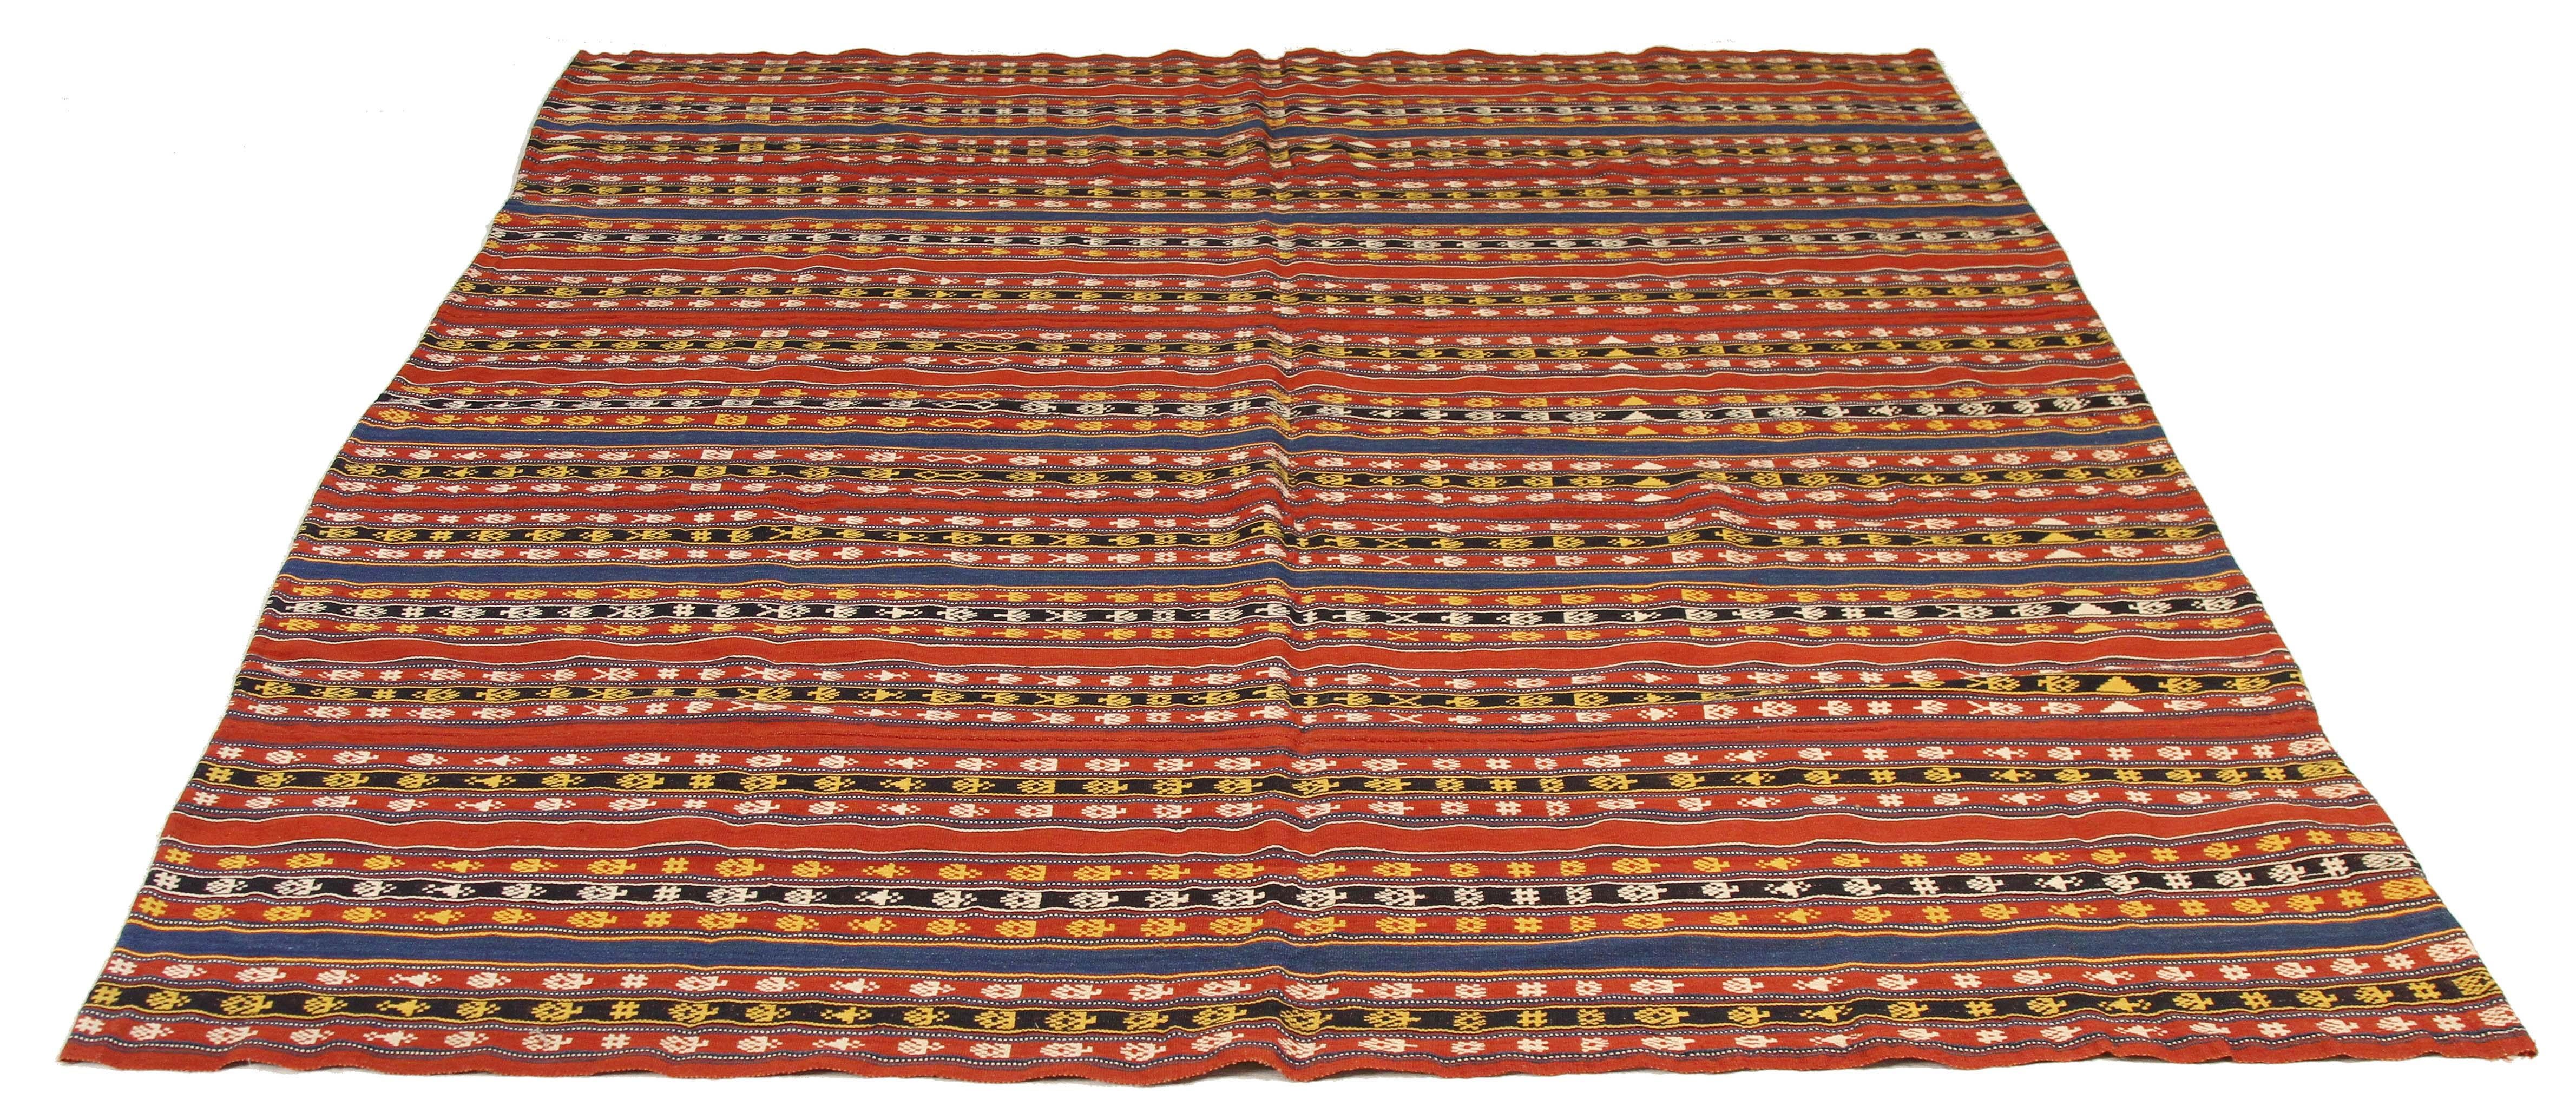 Antique Persian rug handwoven from the finest sheep’s wool and colored with all-natural vegetable dyes that are safe for humans and pets. It’s a traditional Jajim flat-weave design featuring white and gold geometric details on a red and blue striped